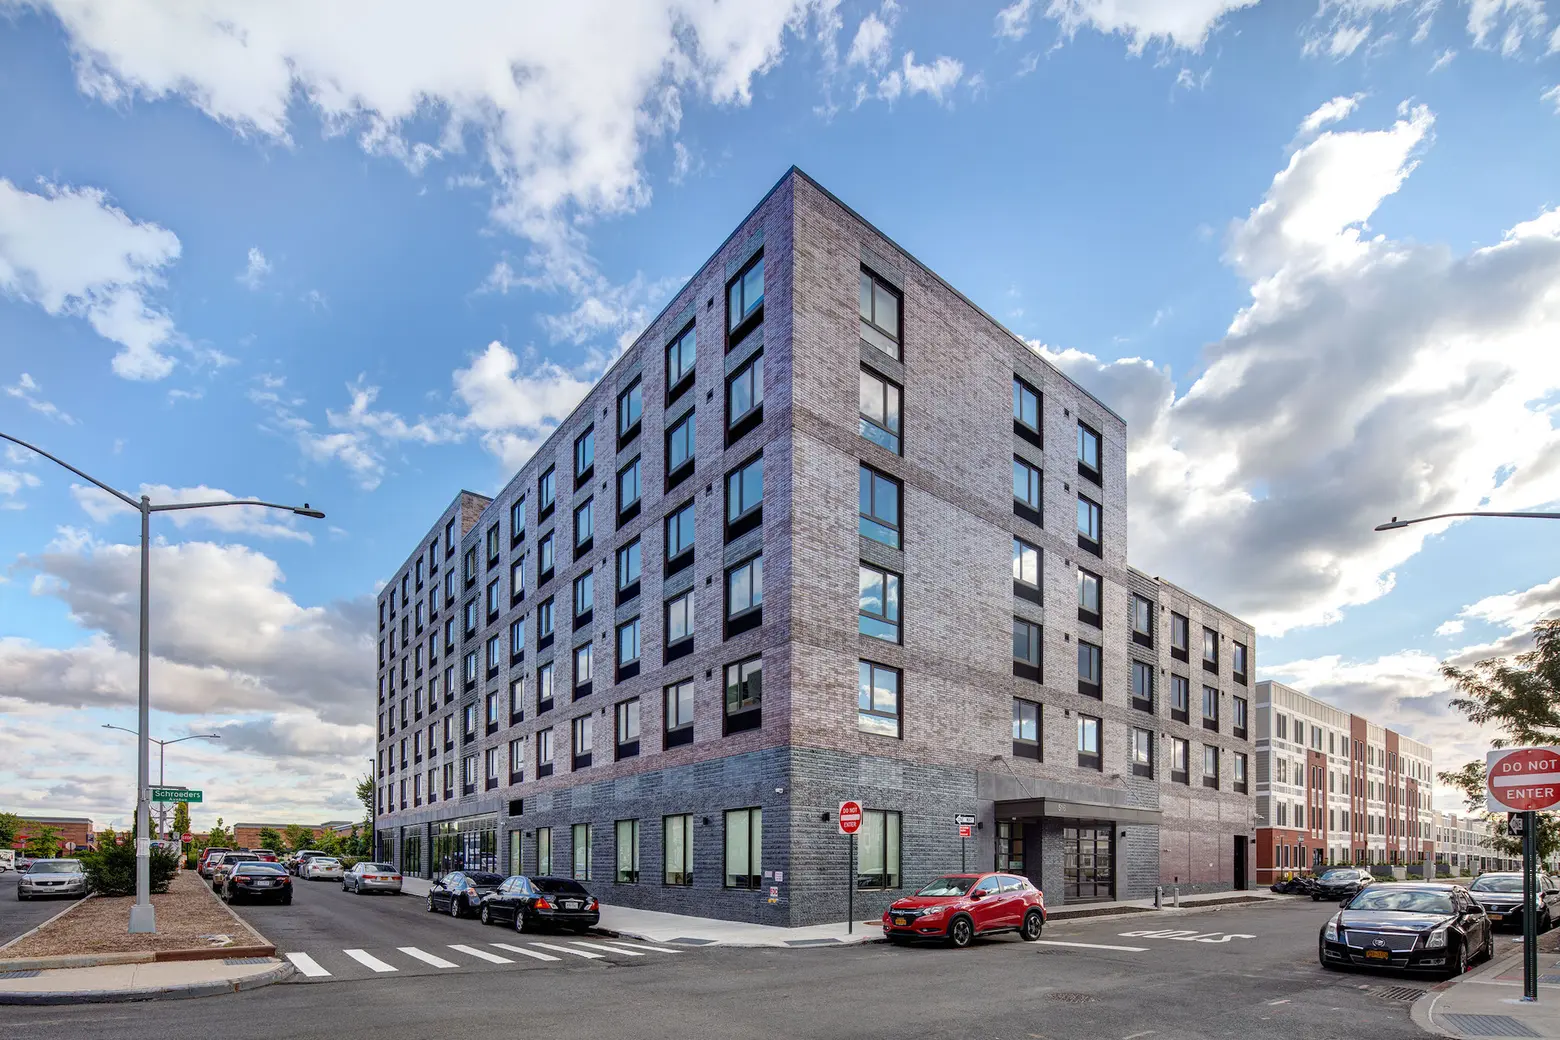 80-unit affordable building for seniors opens in East New York